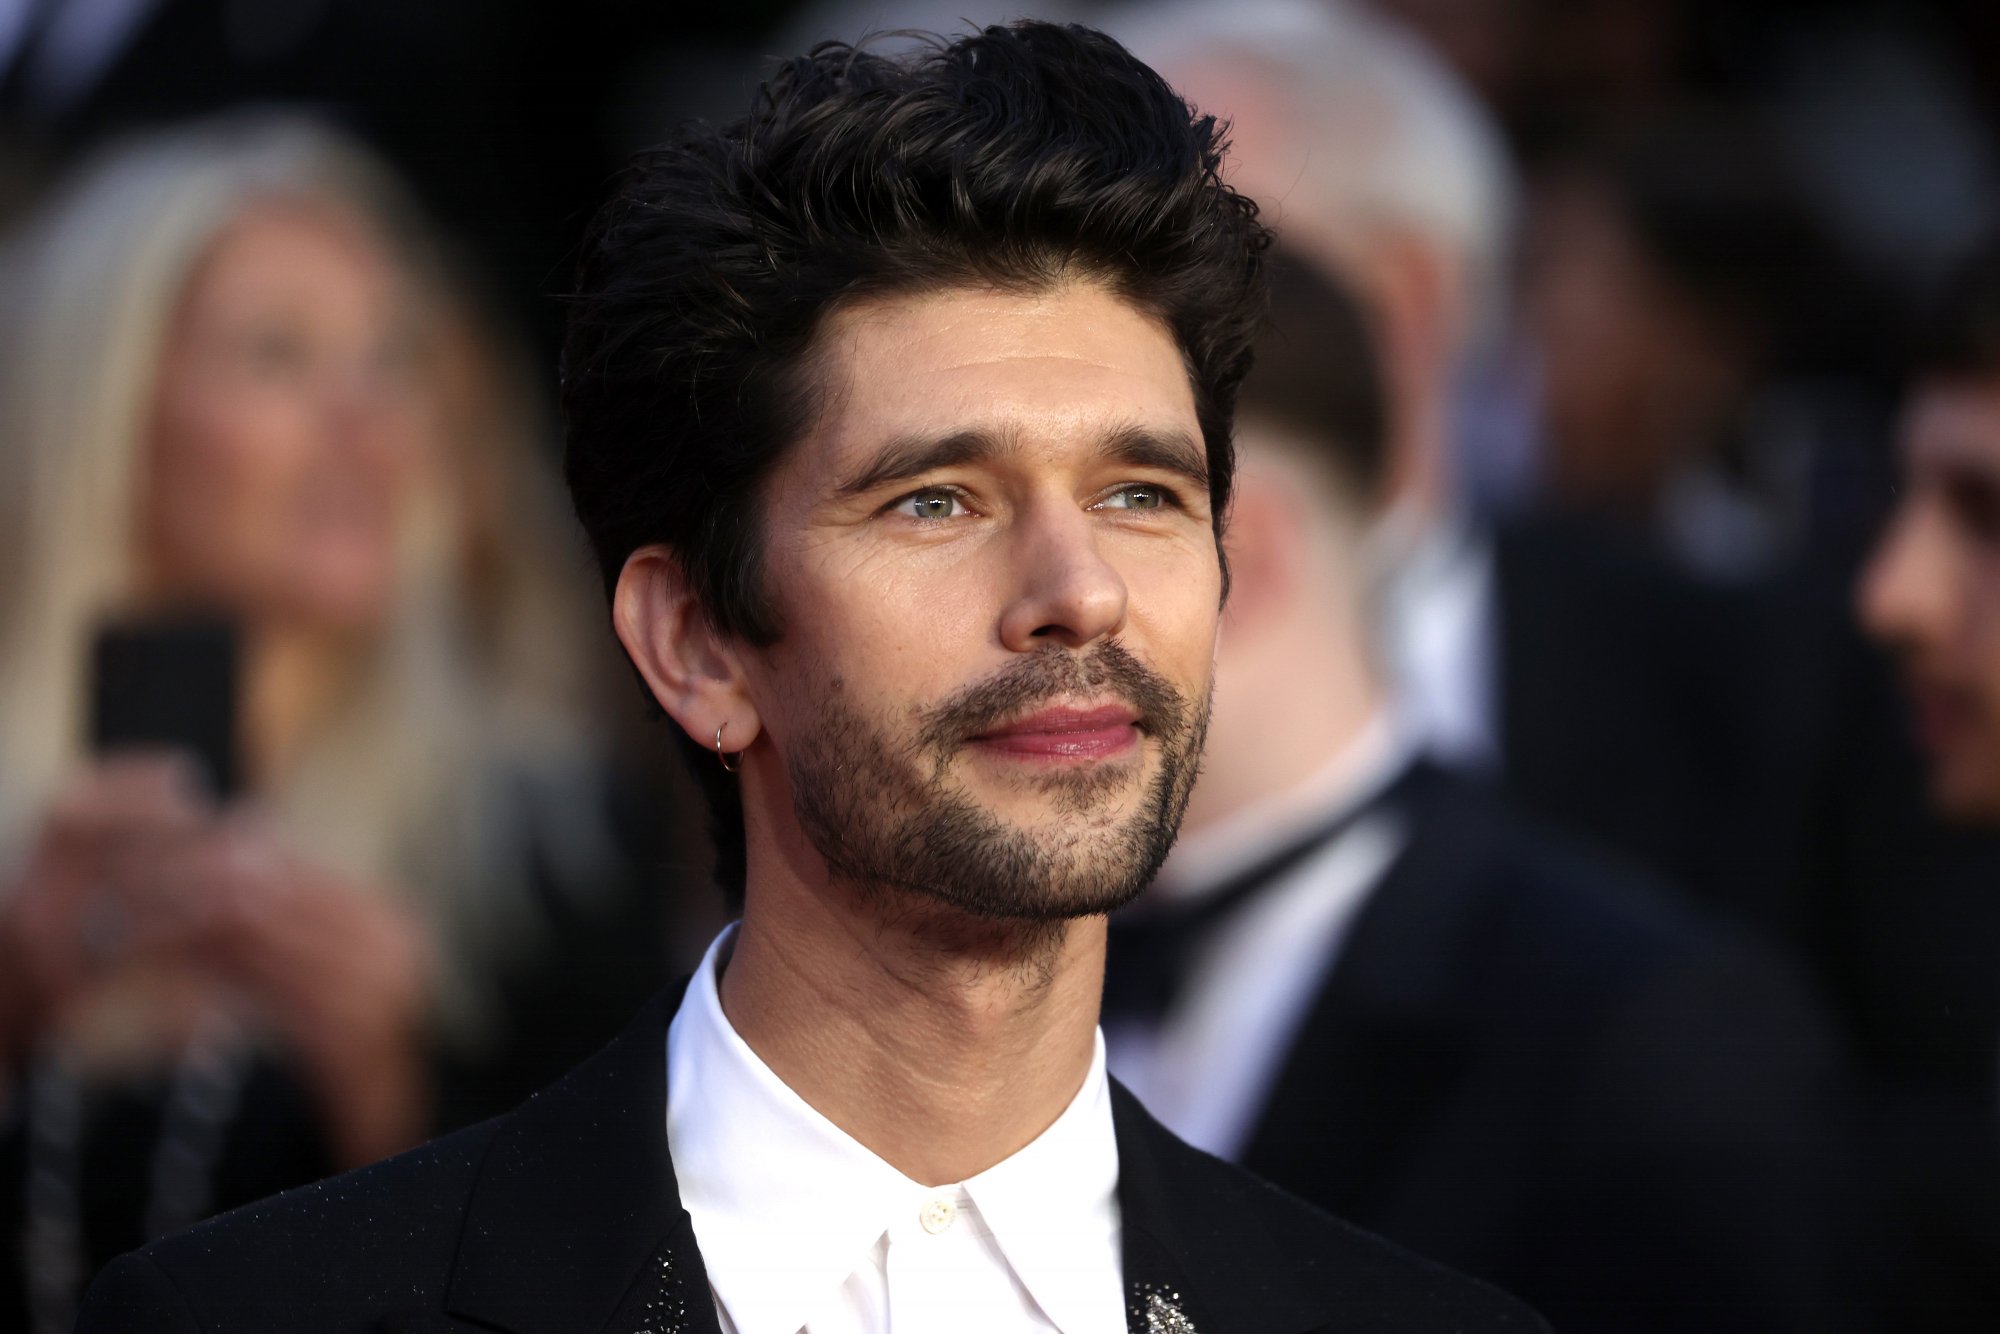 James Bond 'No Time to Die' Q actor Ben Whishaw on the premiere red carpet at Royal Albert Hall